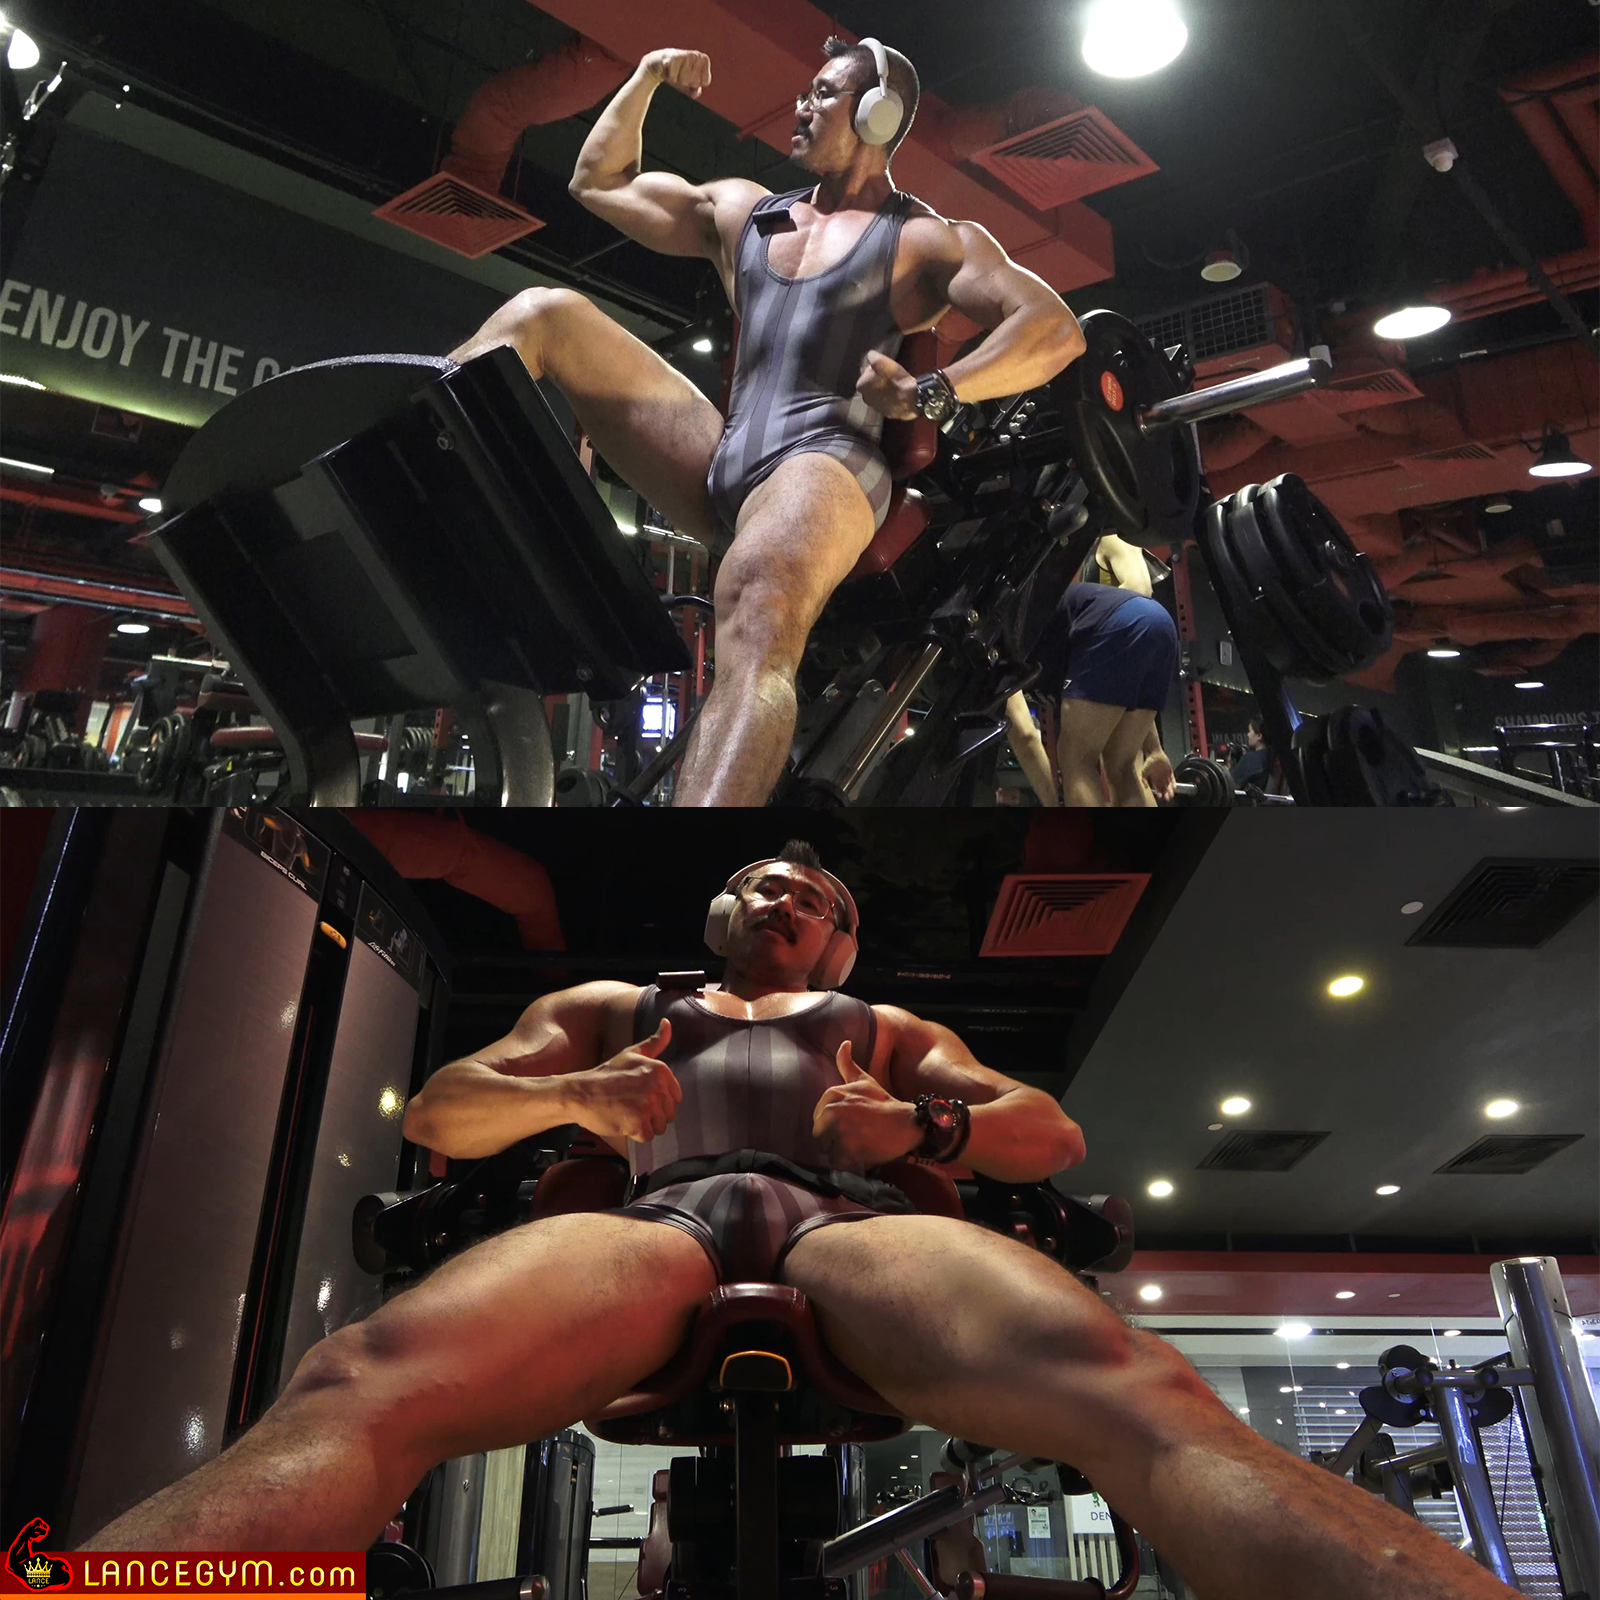 Pumping Muscle in the Gym Vol. 7